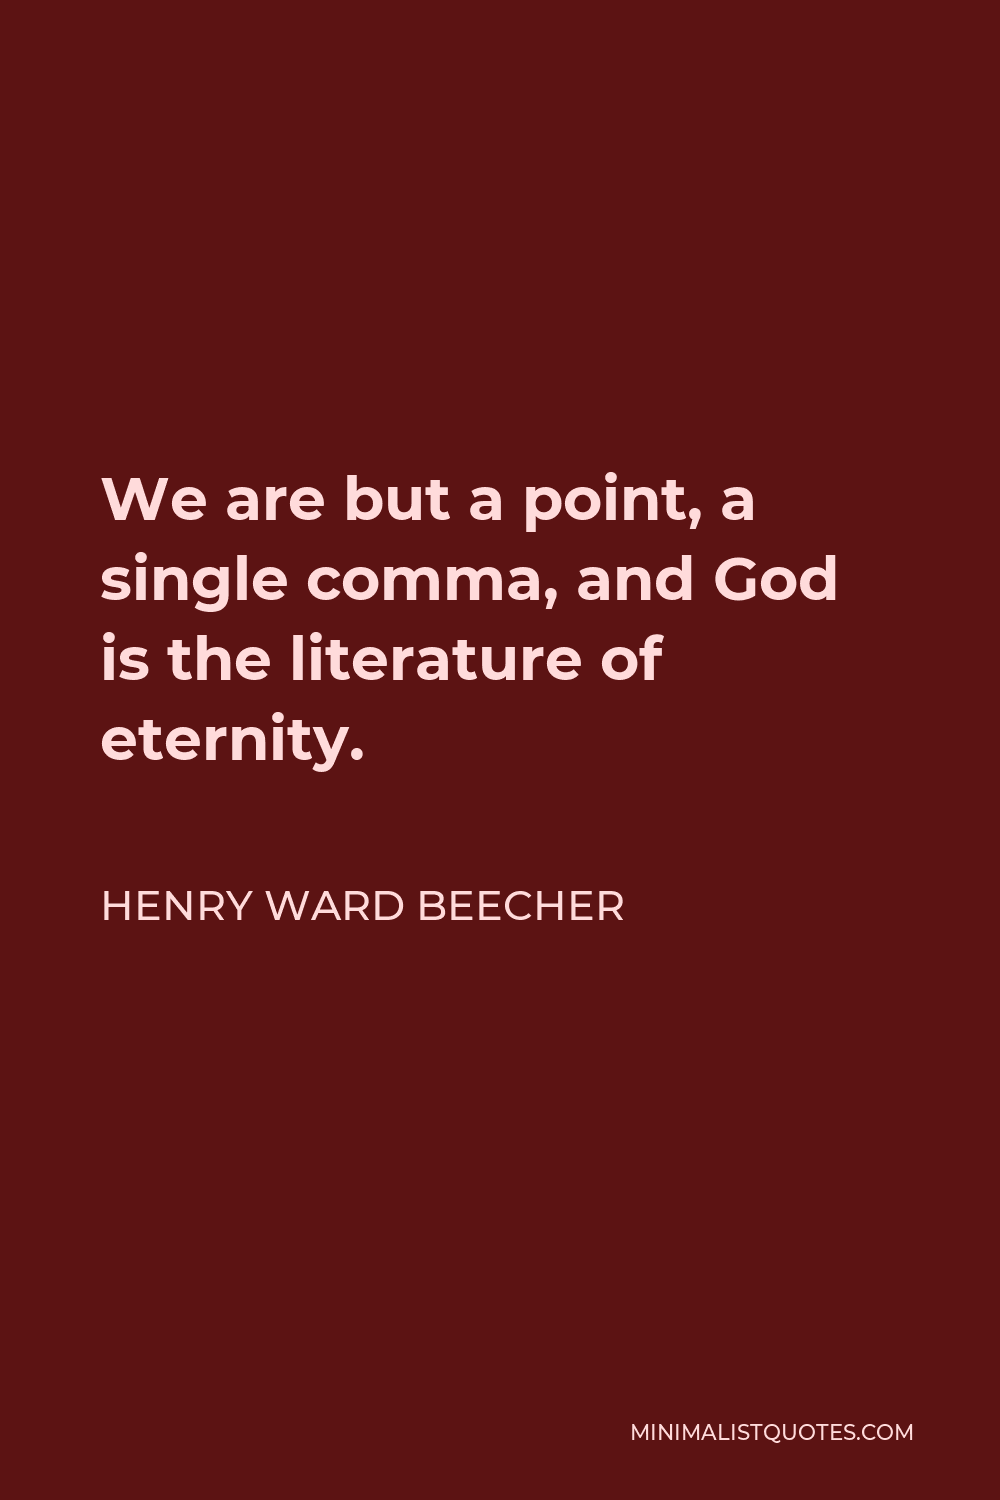 Henry Ward Beecher Quote - We are but a point, a single comma, and God is the literature of eternity.